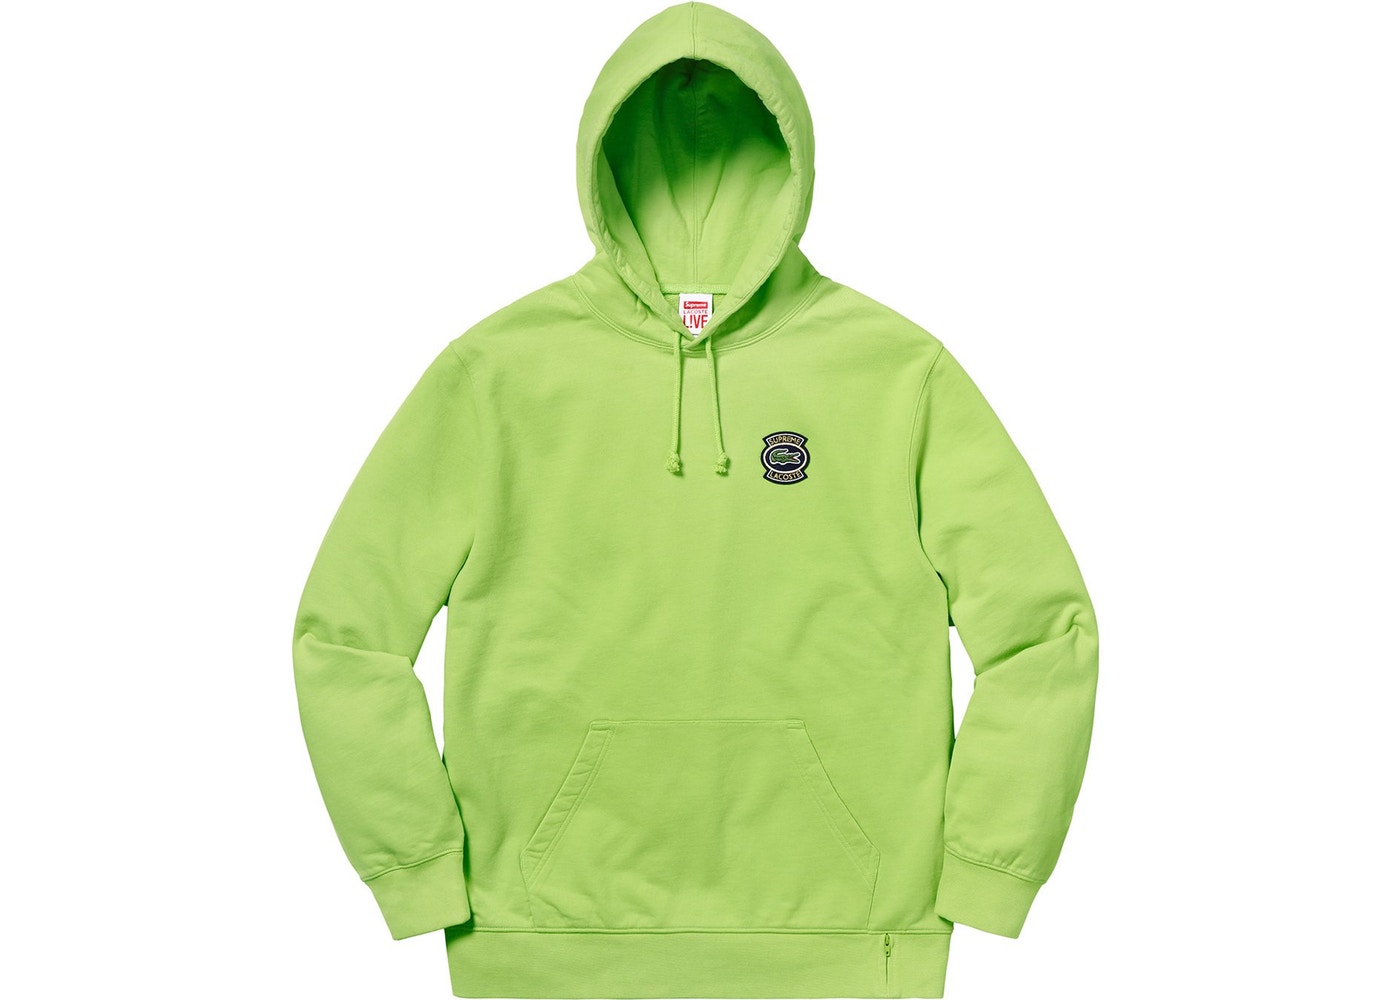 Hello, please do you know where can i find this Lacoste x Supreme hoodie? :  r/DHgate